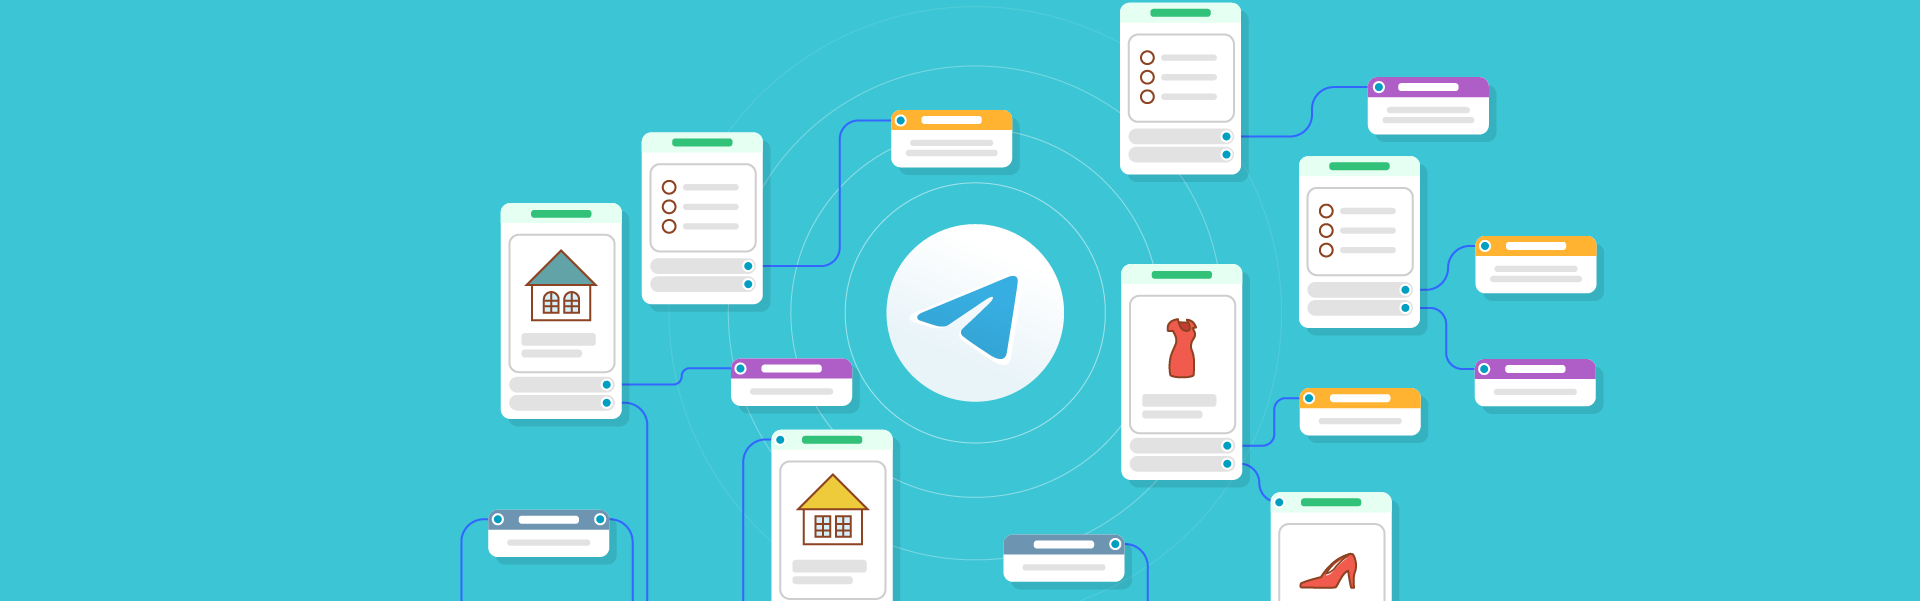 Best Telegram Bot Examples to Get Inspired by in 2022